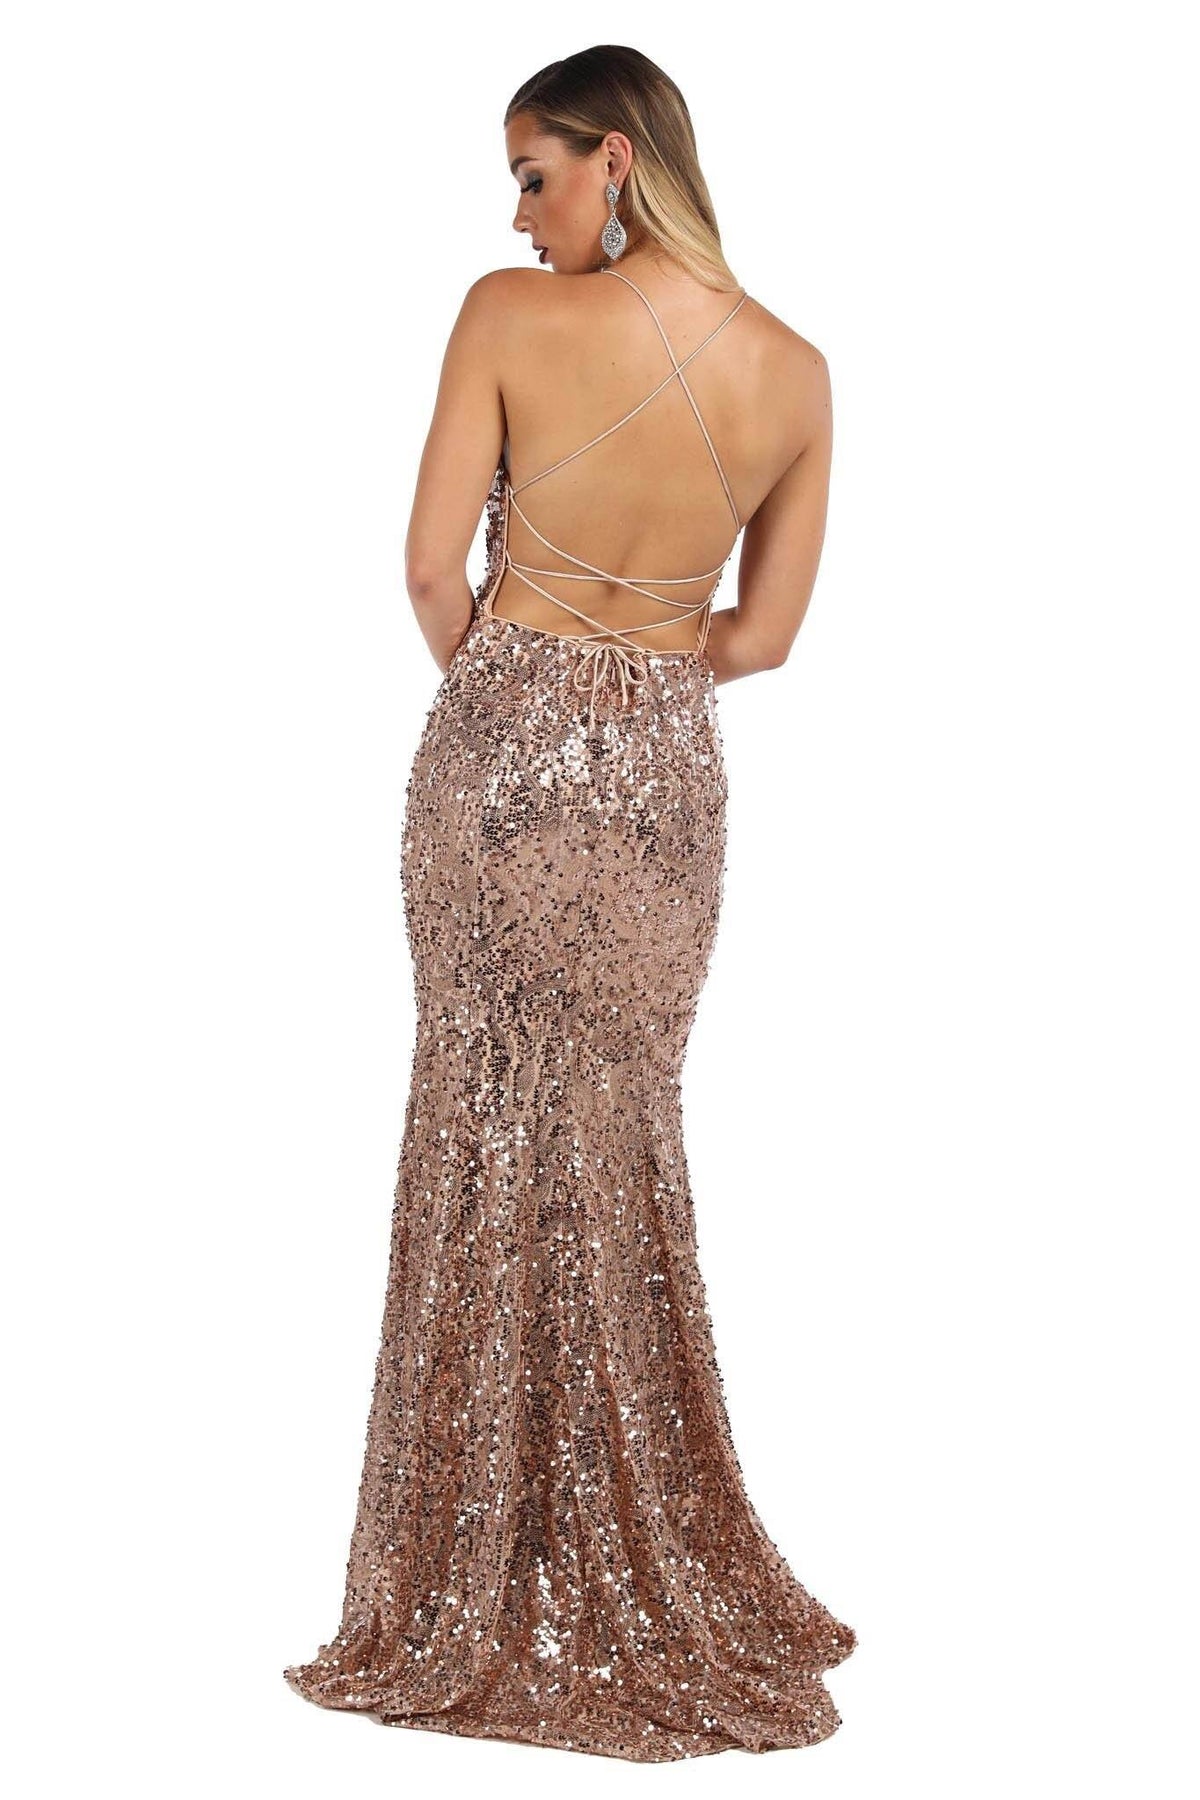 Rose Gold sequin beaded gown with V neckline, figure flattering fit, lace-up back and a small train